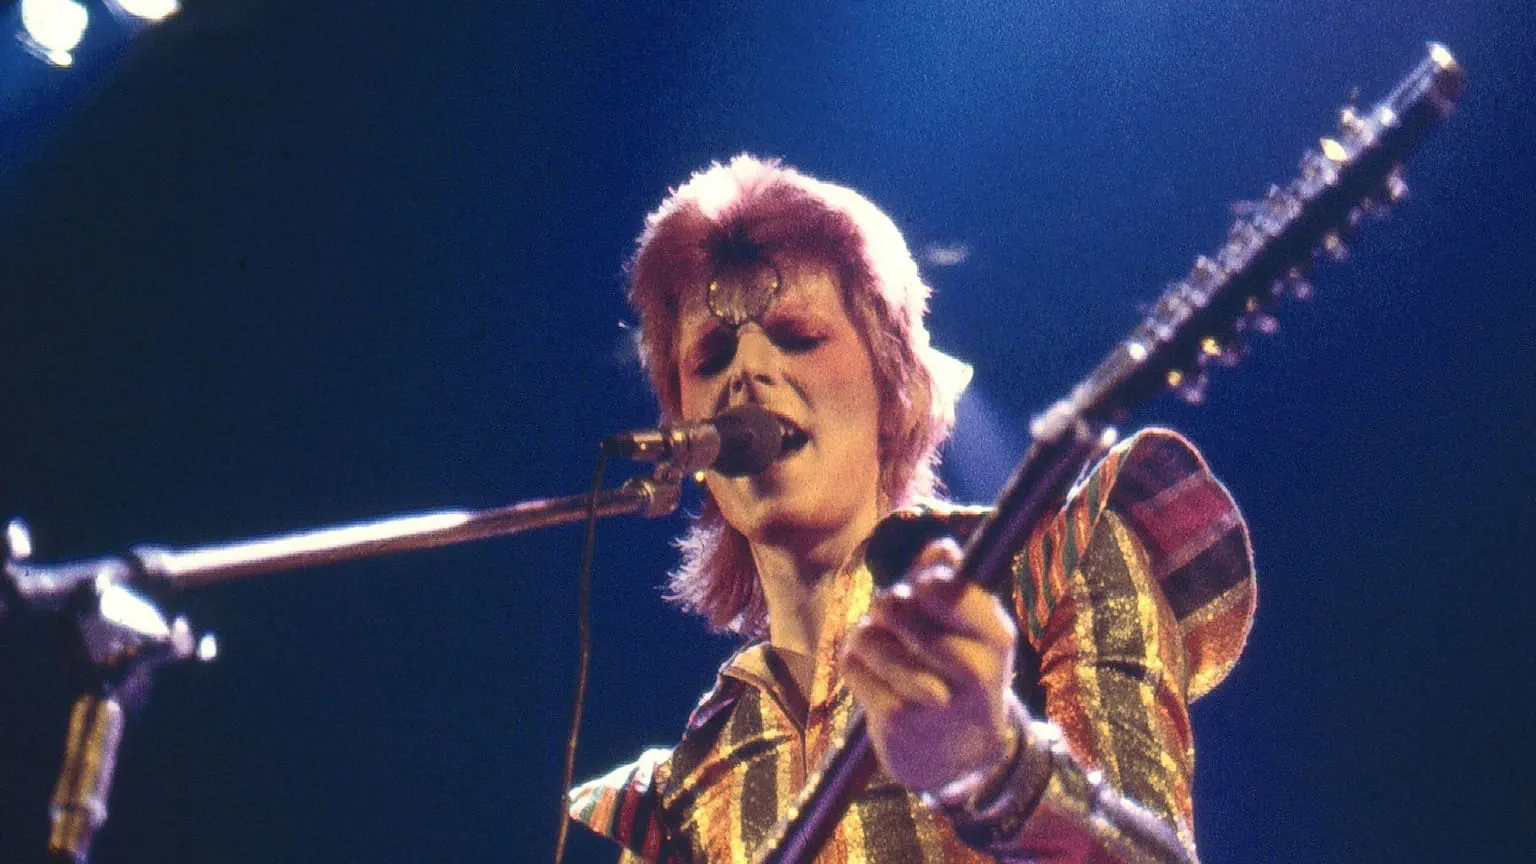 Relive rock history with Ziggy Stardust and the Spiders from Mars